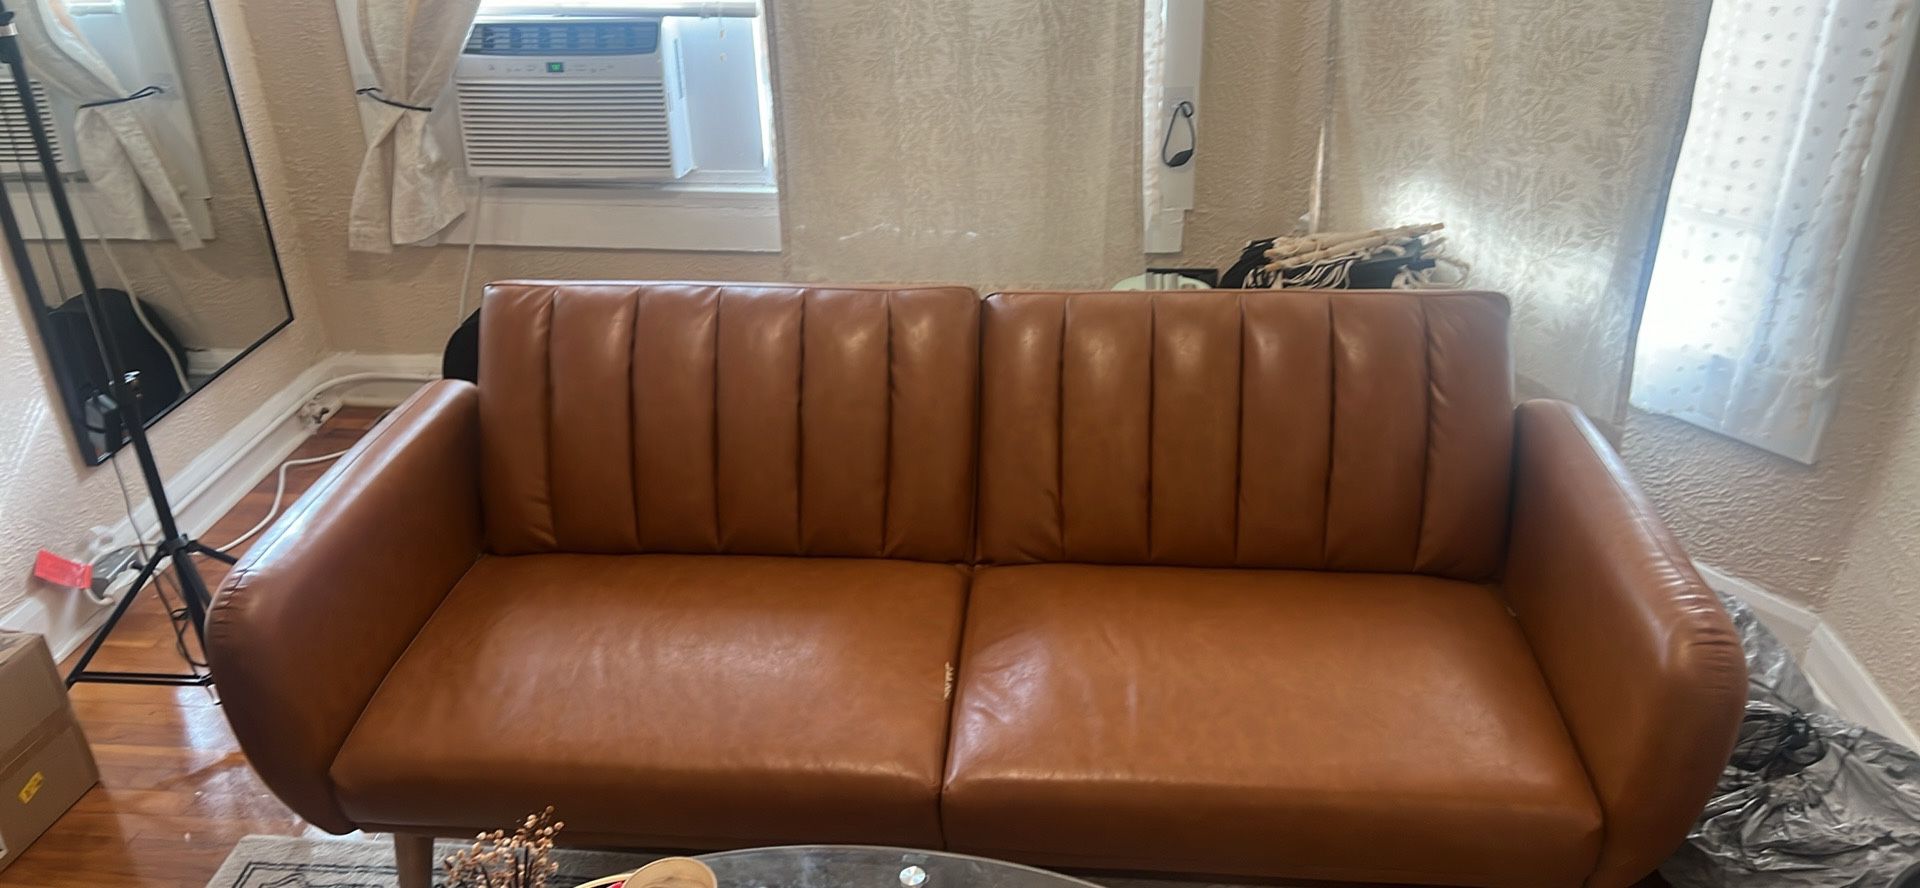 Brown leather futon couch